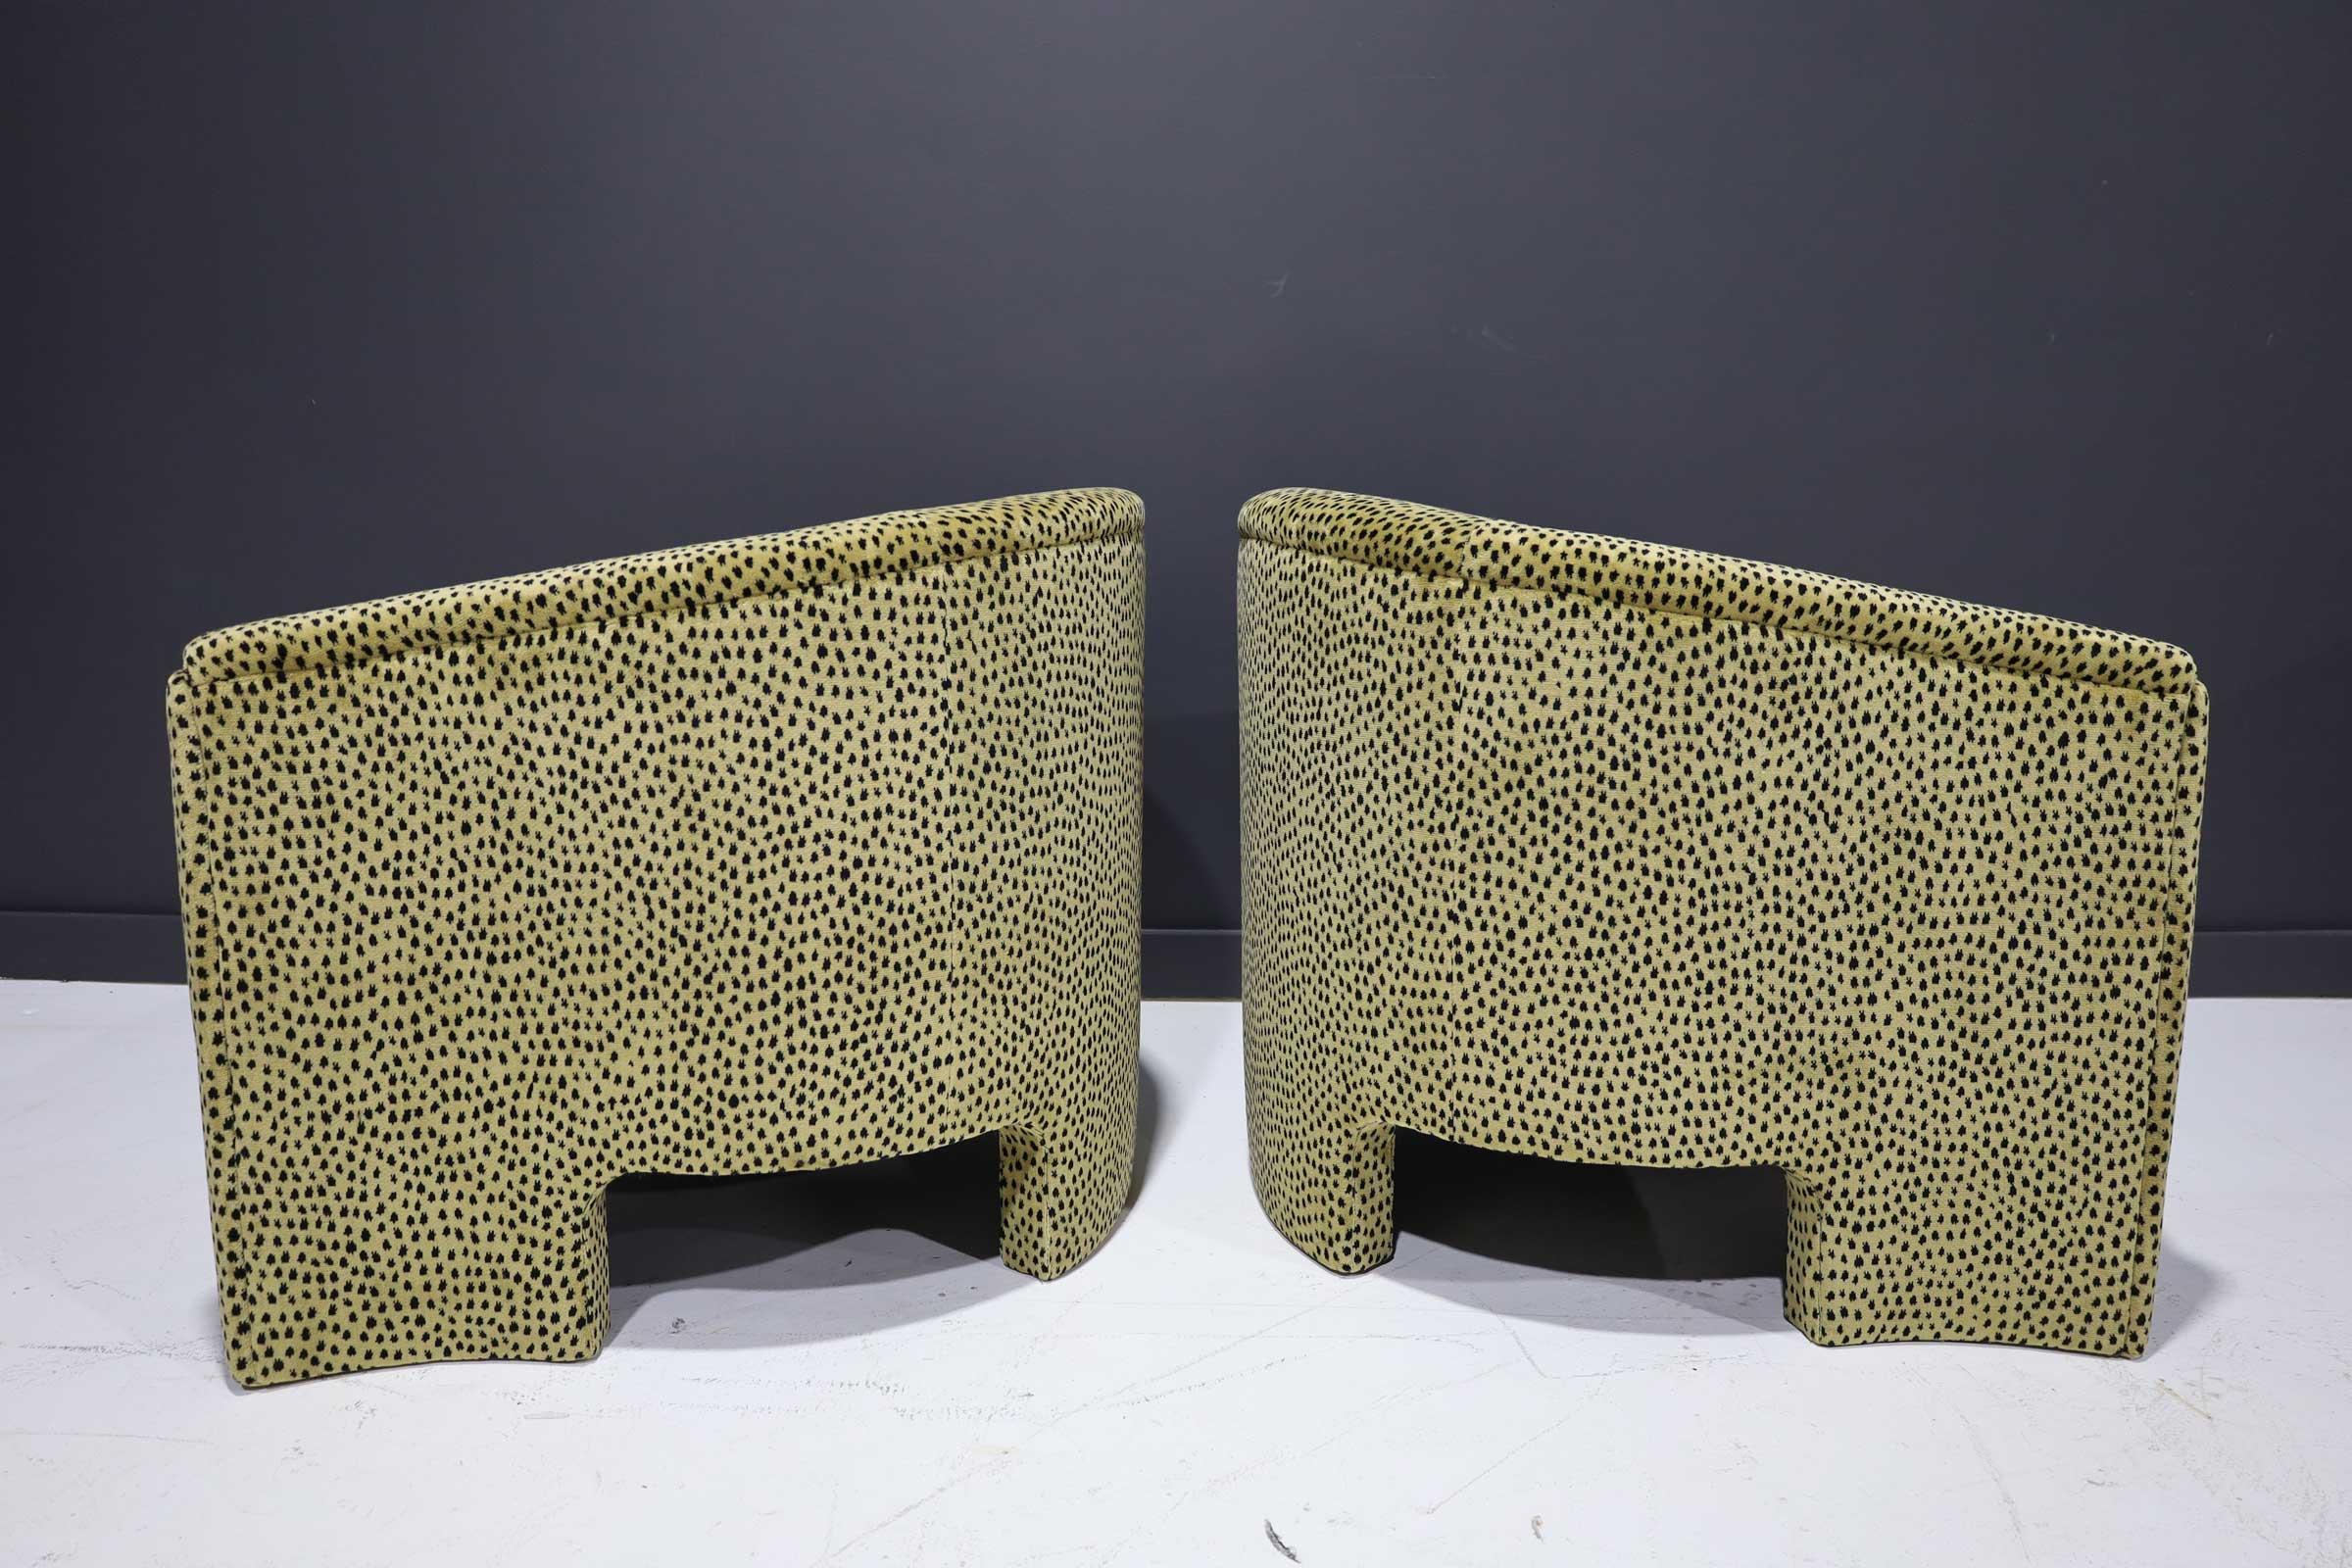 North American Pair of Mid Century Modern Tub Chairs in Cheetah Print Velvet For Sale